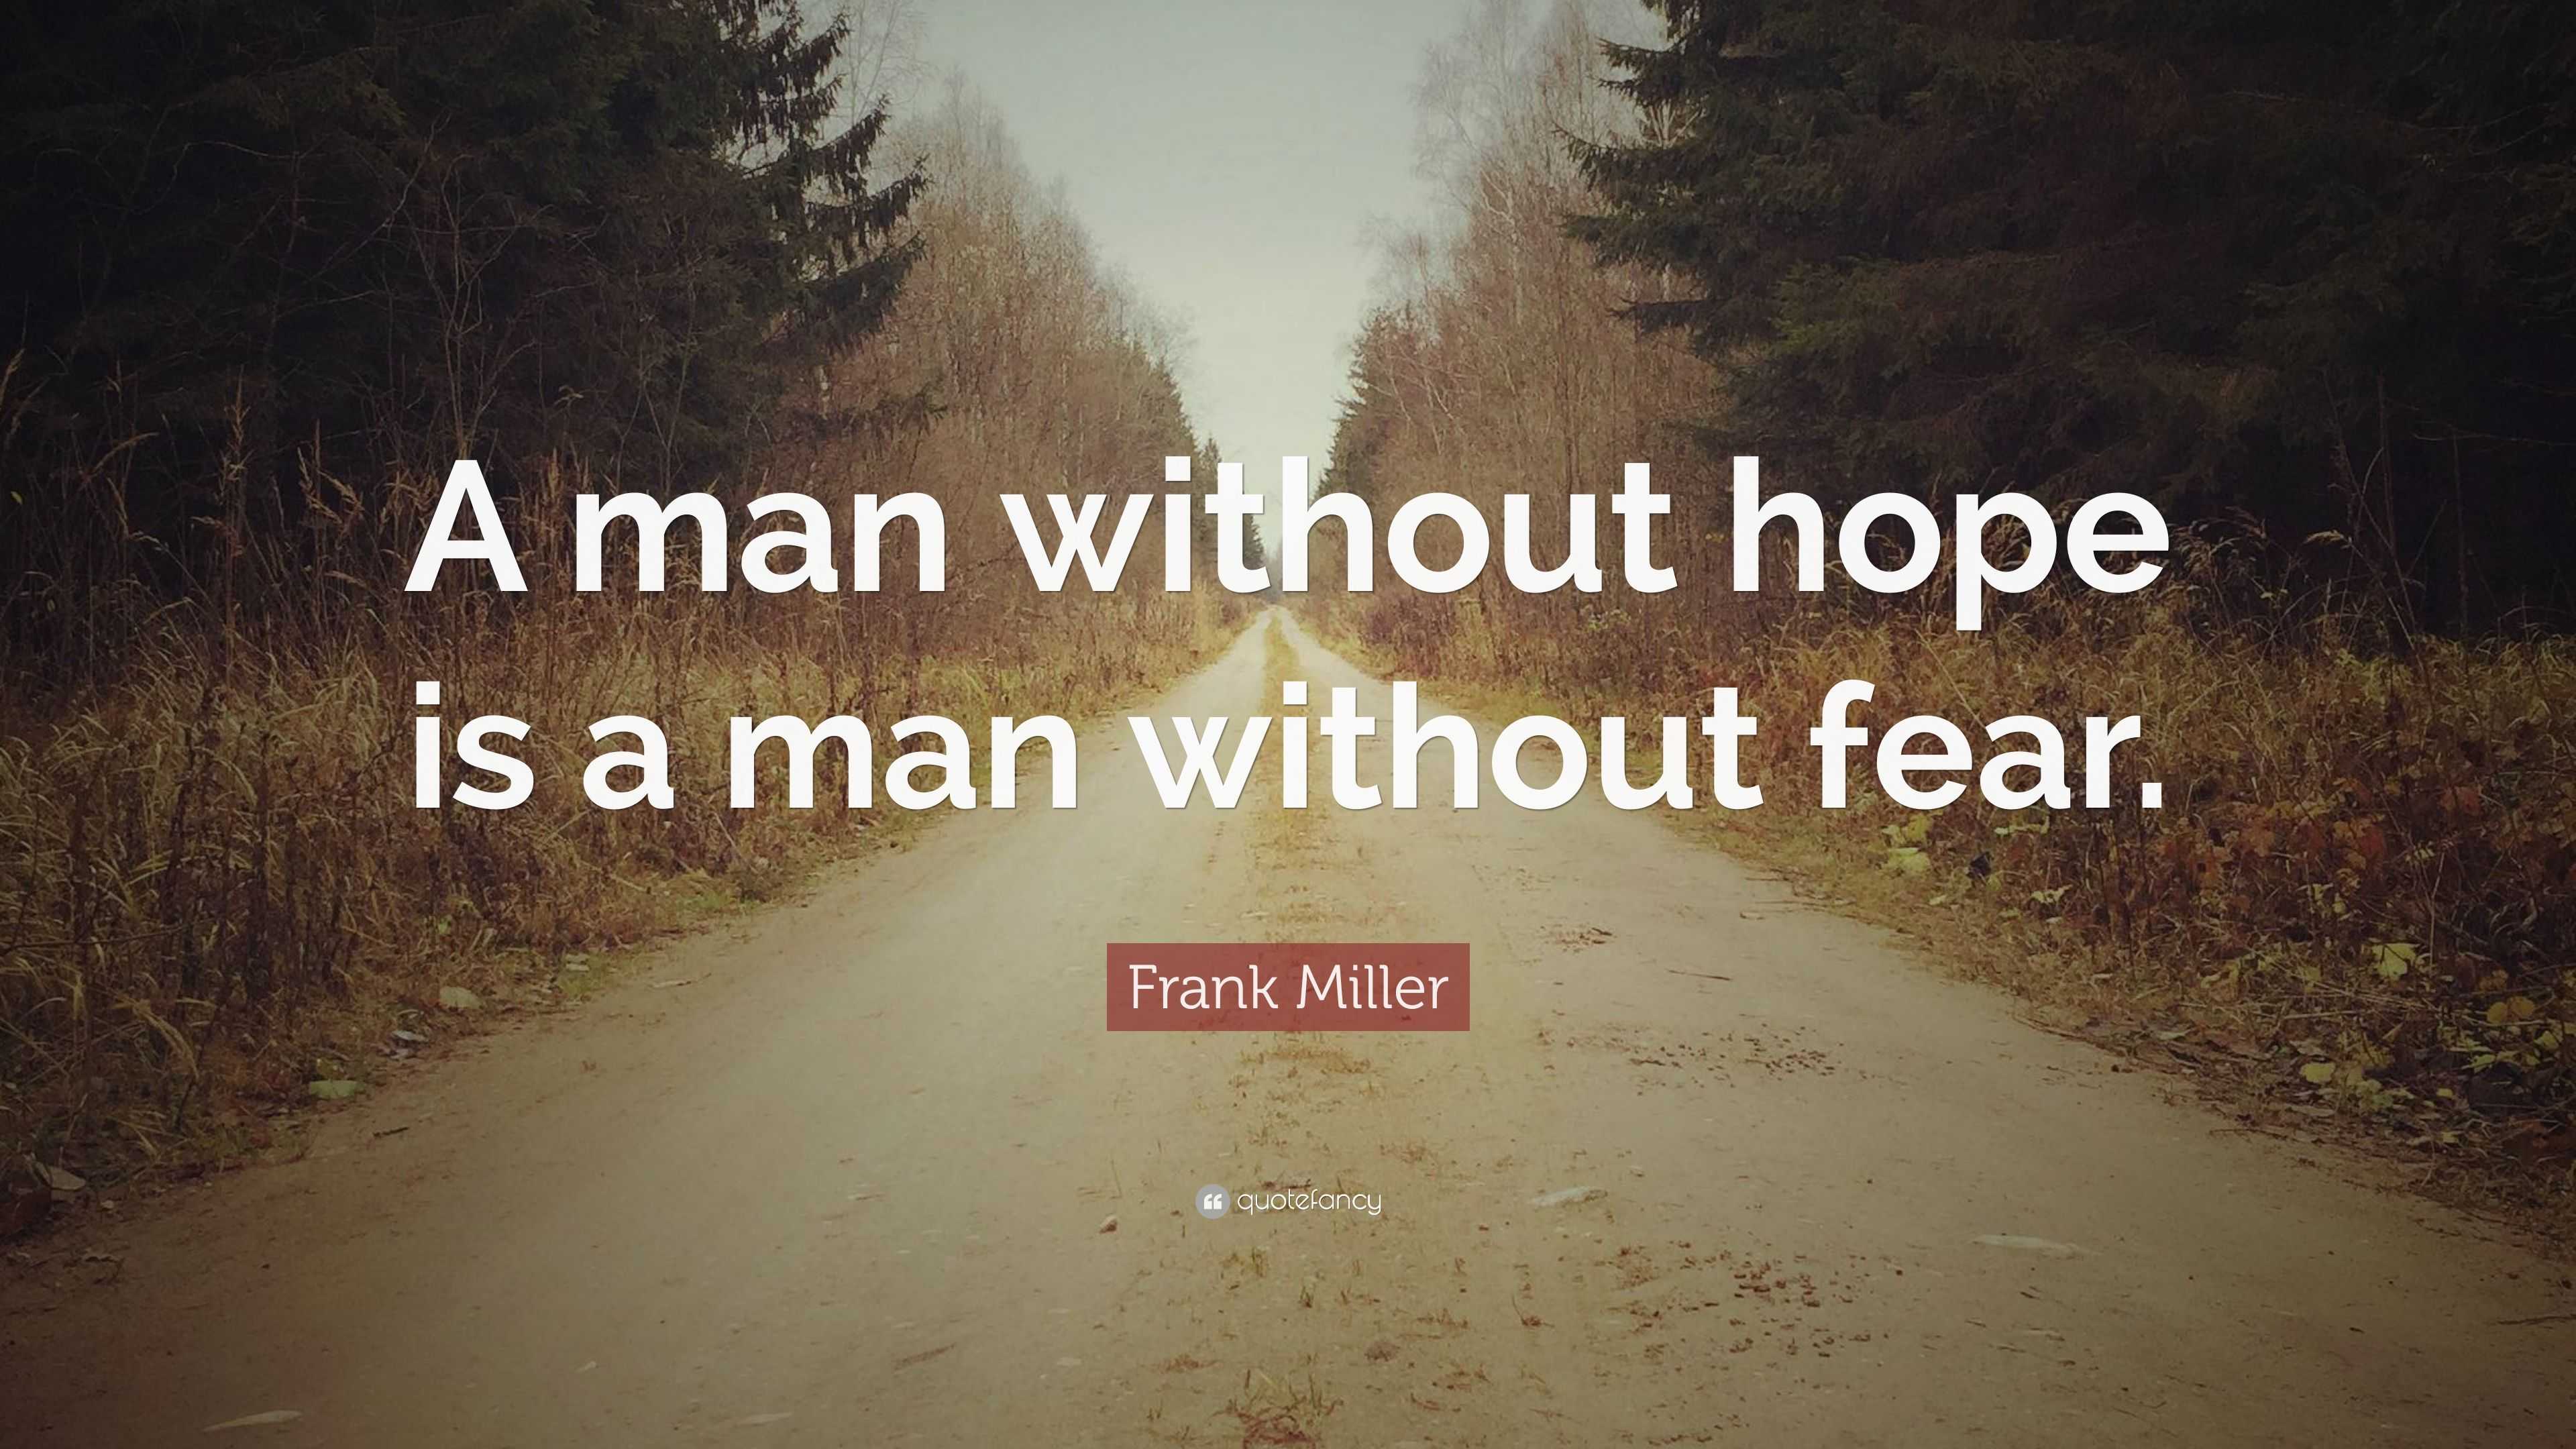 Frank Miller Quote  A man without  hope  is a man without  